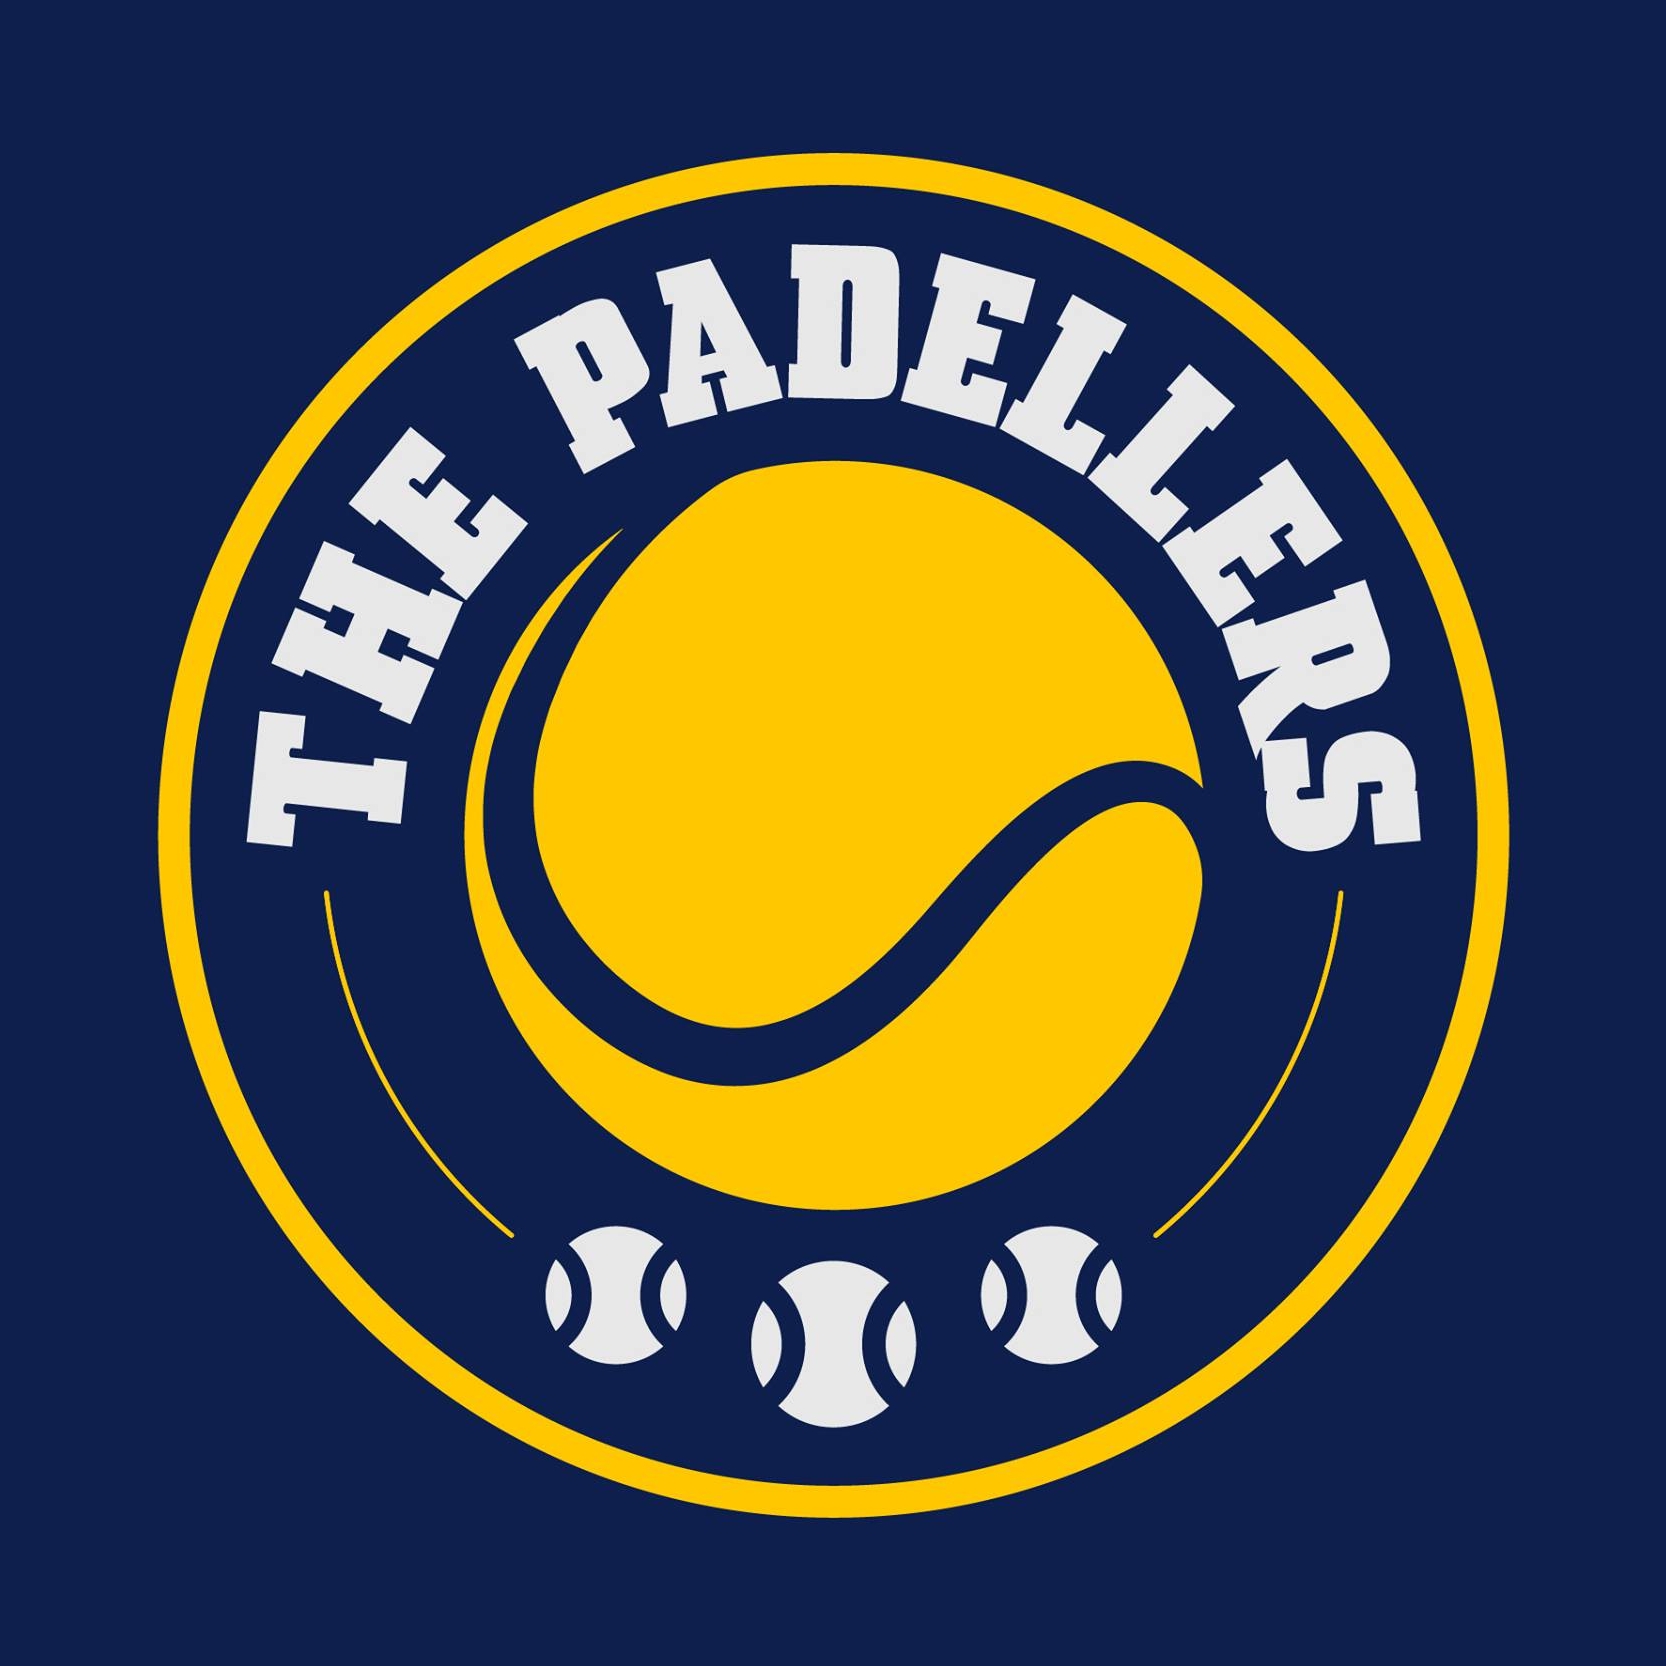 Profile image of venue The Padellers - Roermond